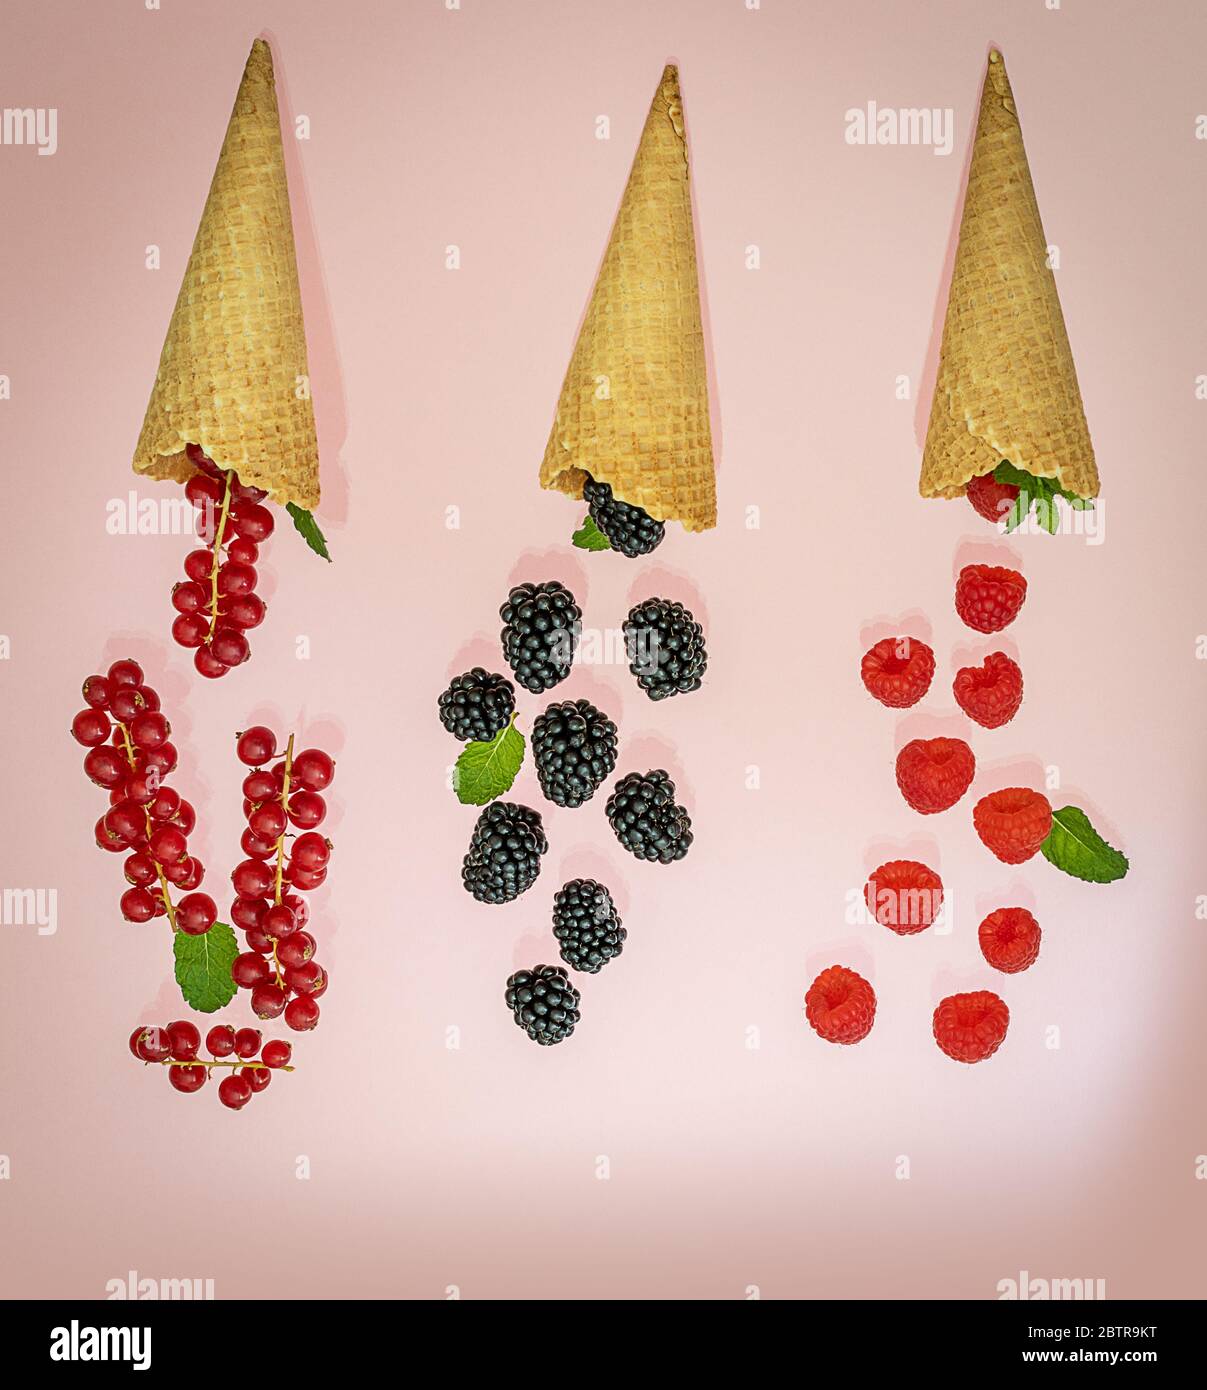 Flipped ice cream cones with various berries. Summer concept. Stock Photo